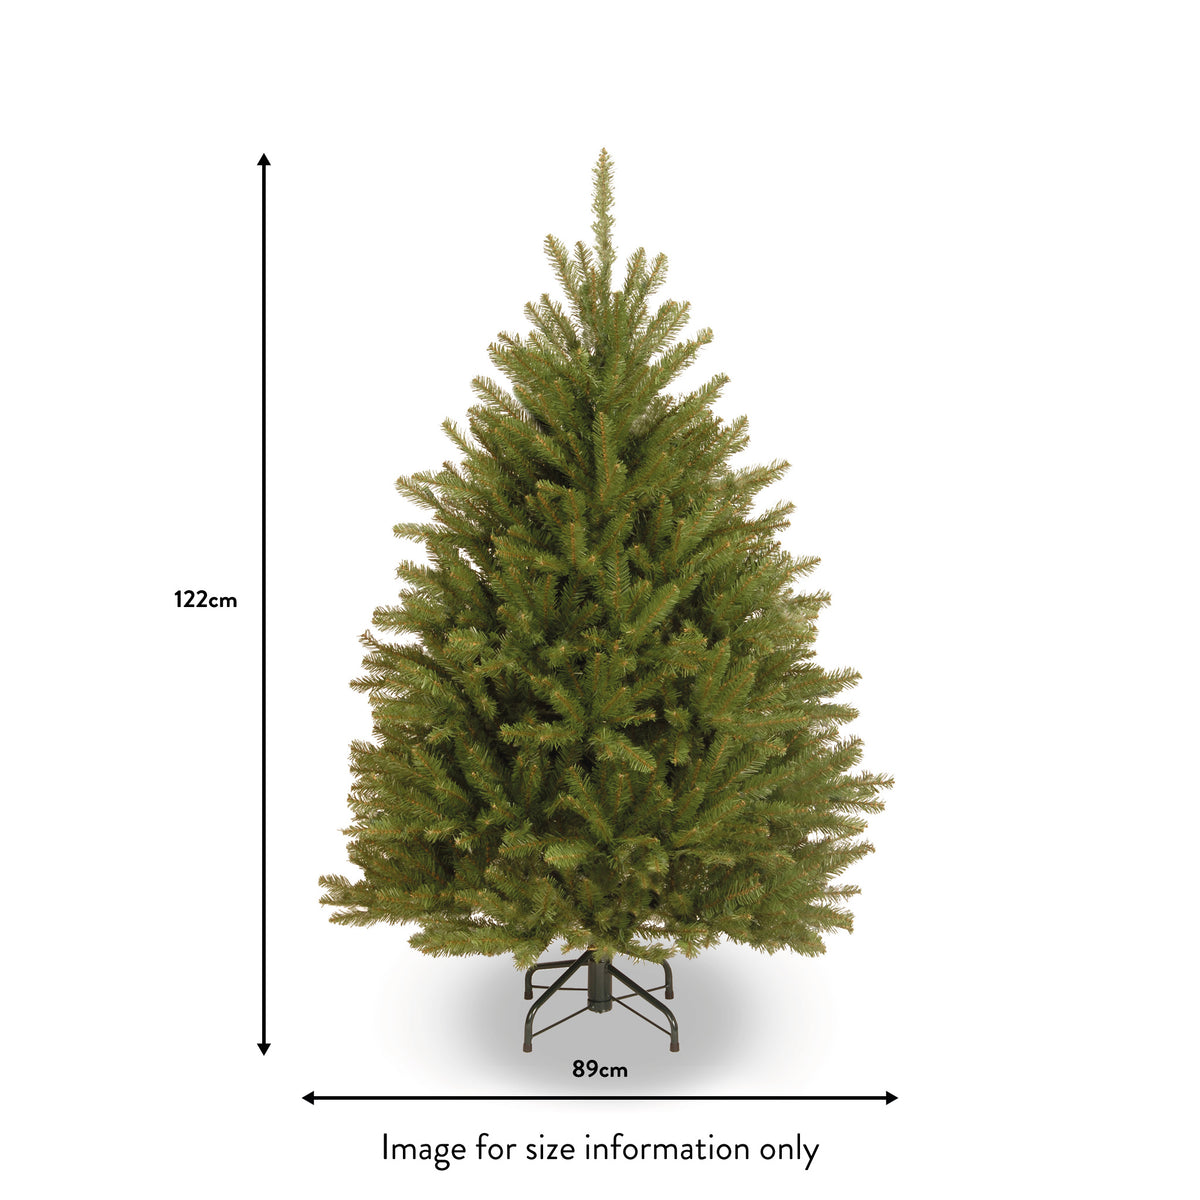 Dunhill Fir 4ft Christmas Tree dimensions